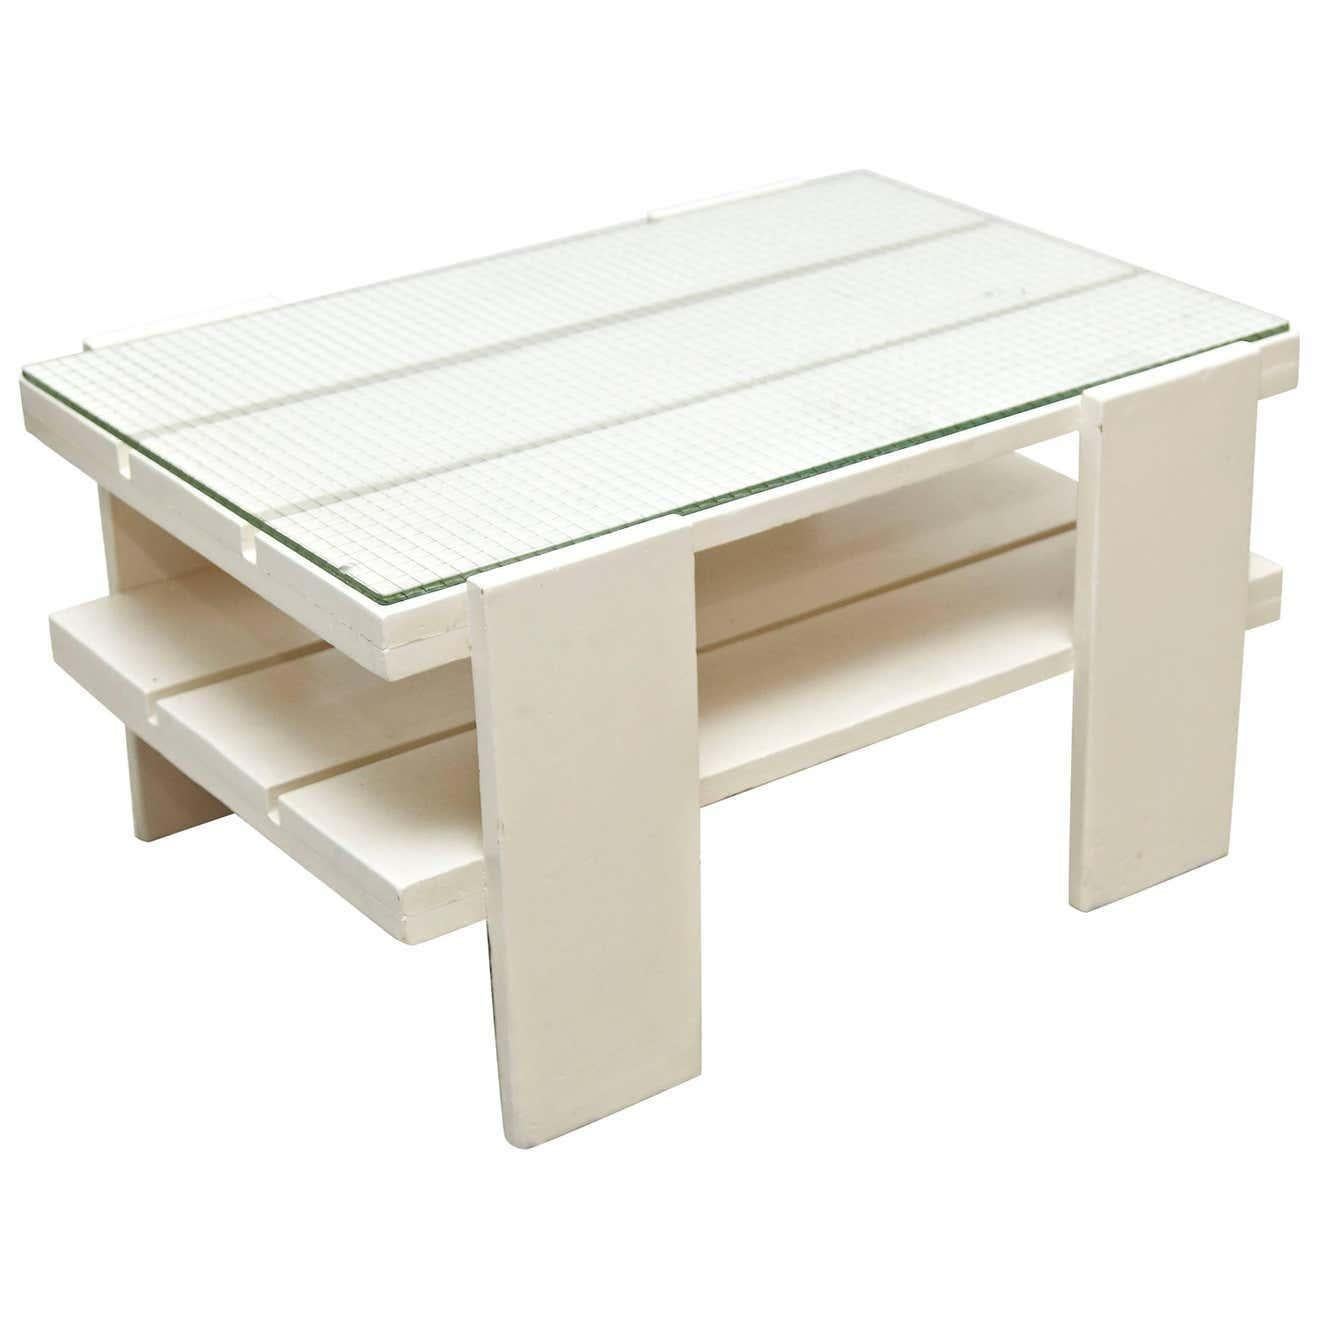 Mid-20th Century White Wood Mid-Century Modern Table in the Style of Gerrit Rietveld, circa 1950 For Sale